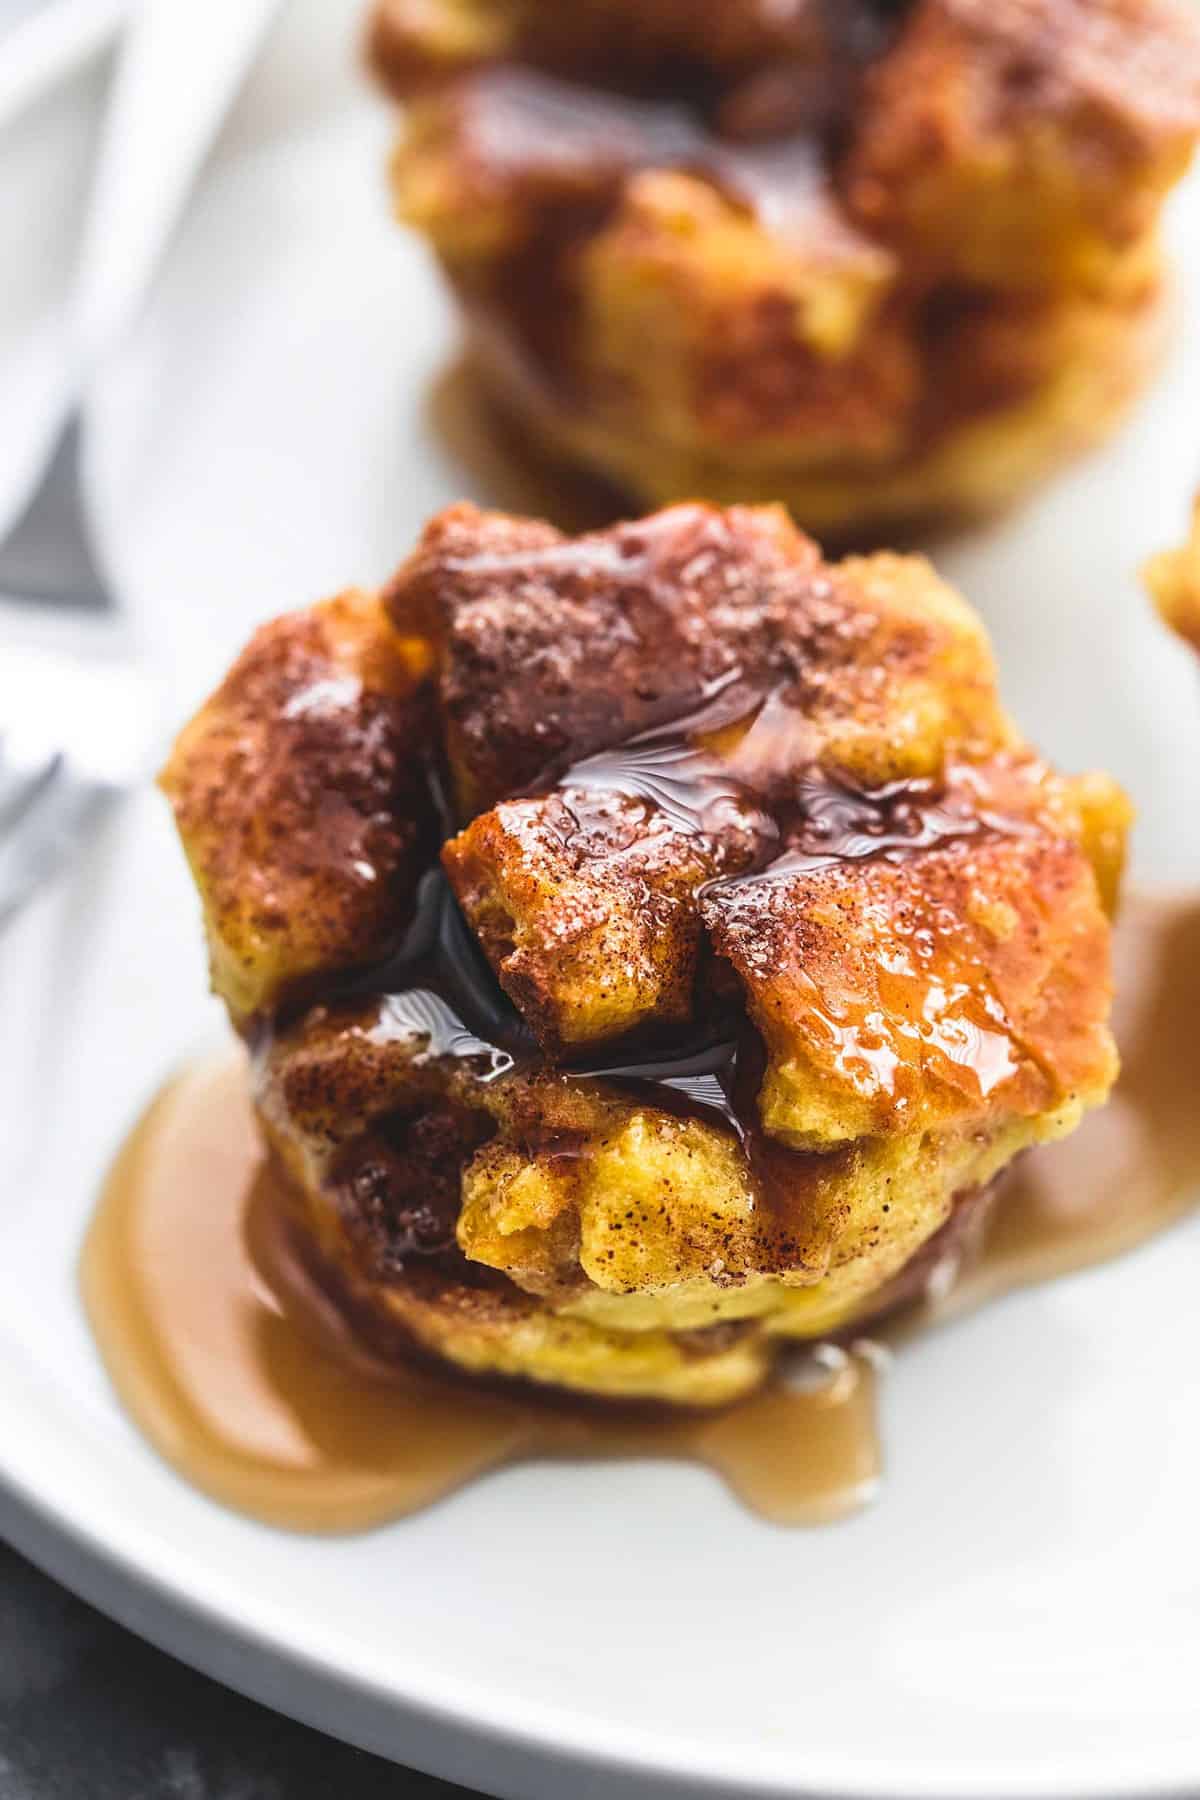 https://www.lecremedelacrumb.com/wp-content/uploads/2018/03/baked-cinnamon-french-toast-muffins-107.jpg